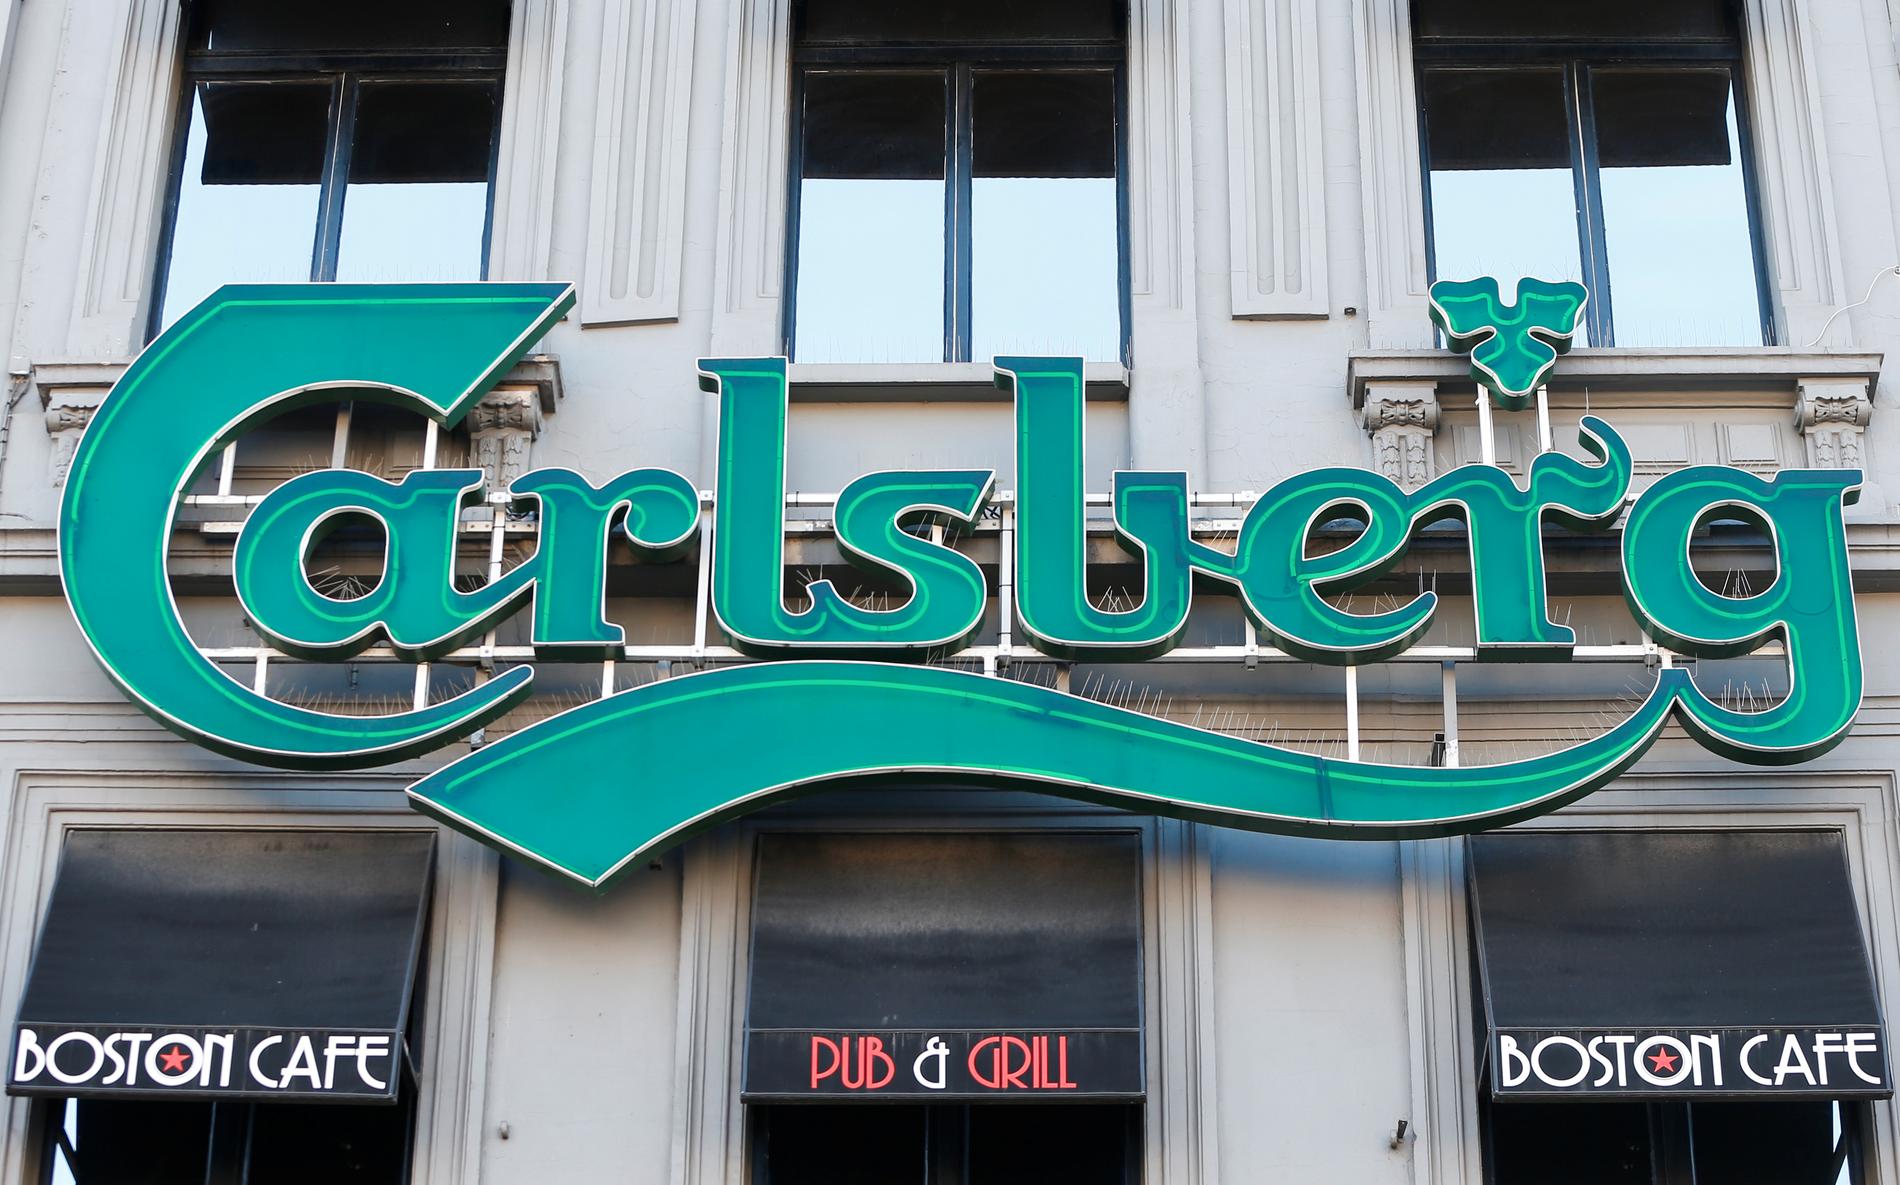 Carlsberg sells its business in Russia – E24